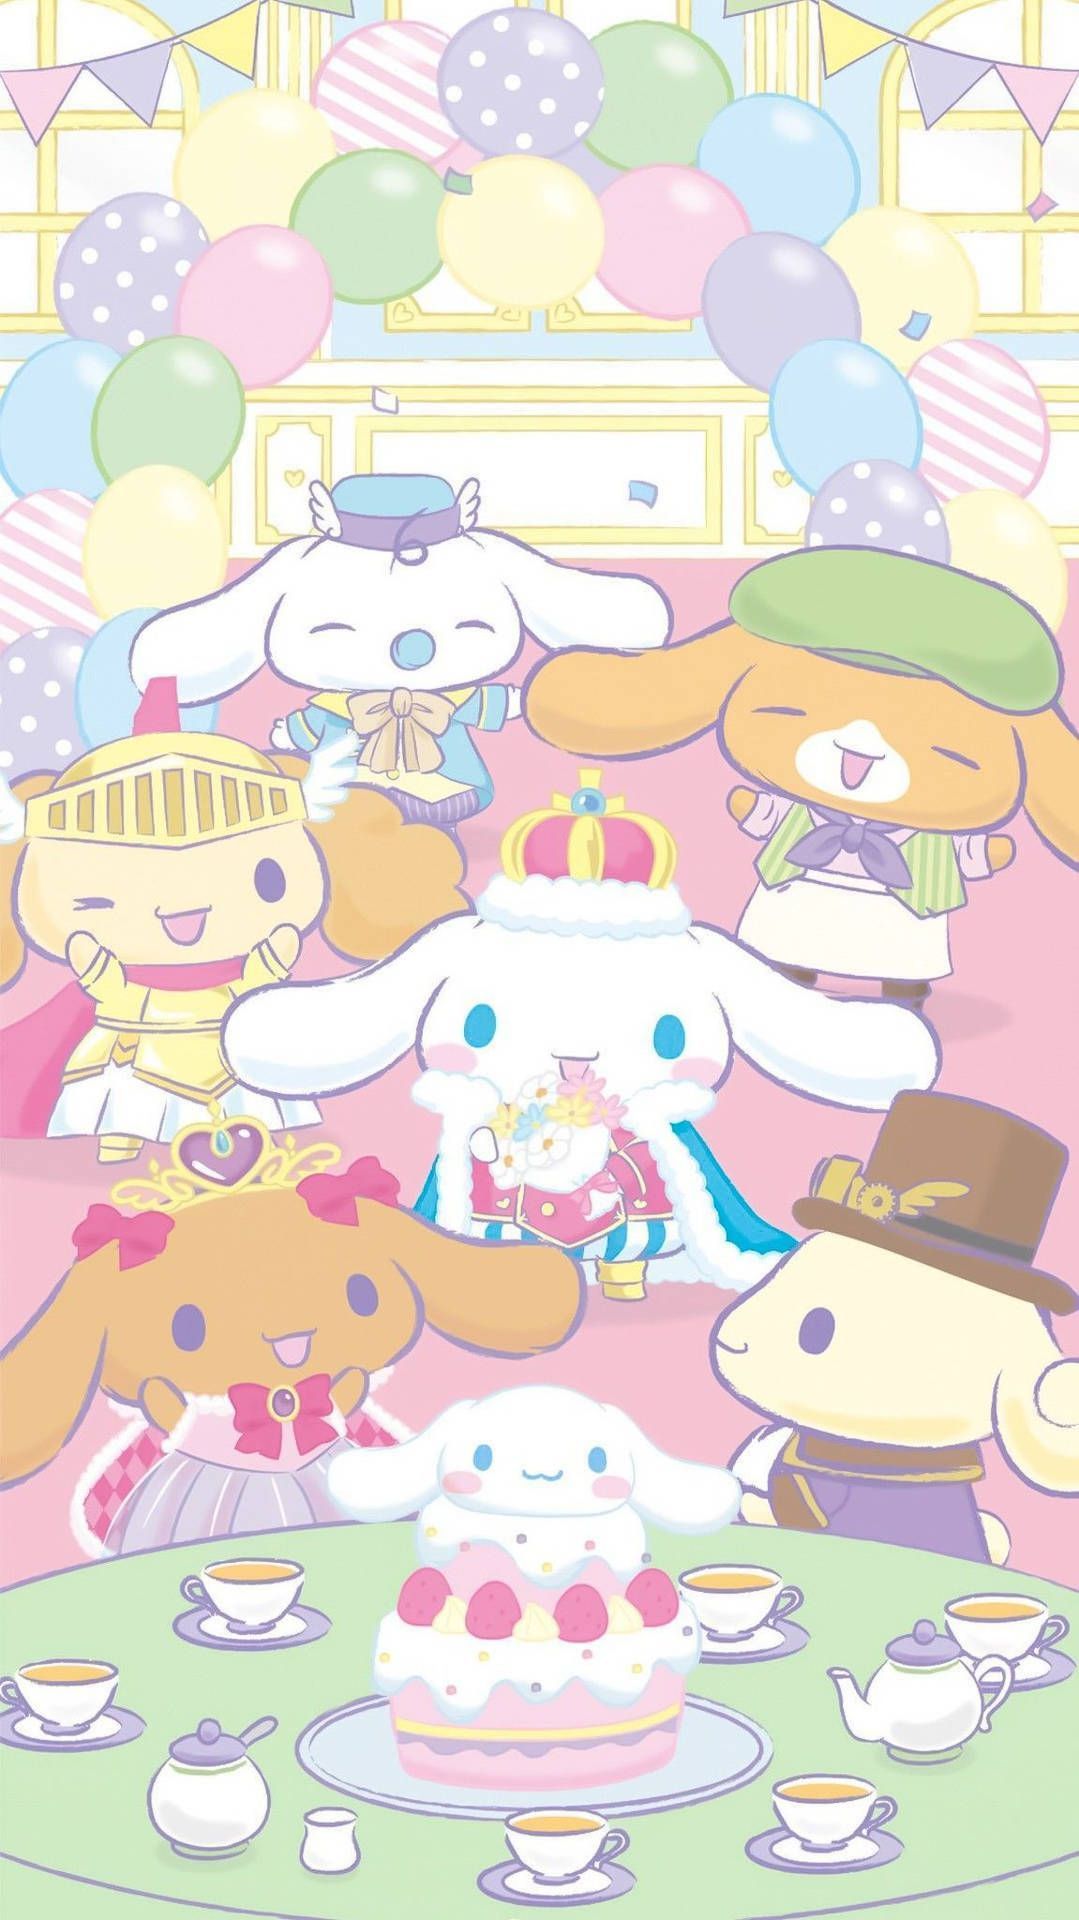 A group of cartoon characters are gathered around - Cinnamoroll